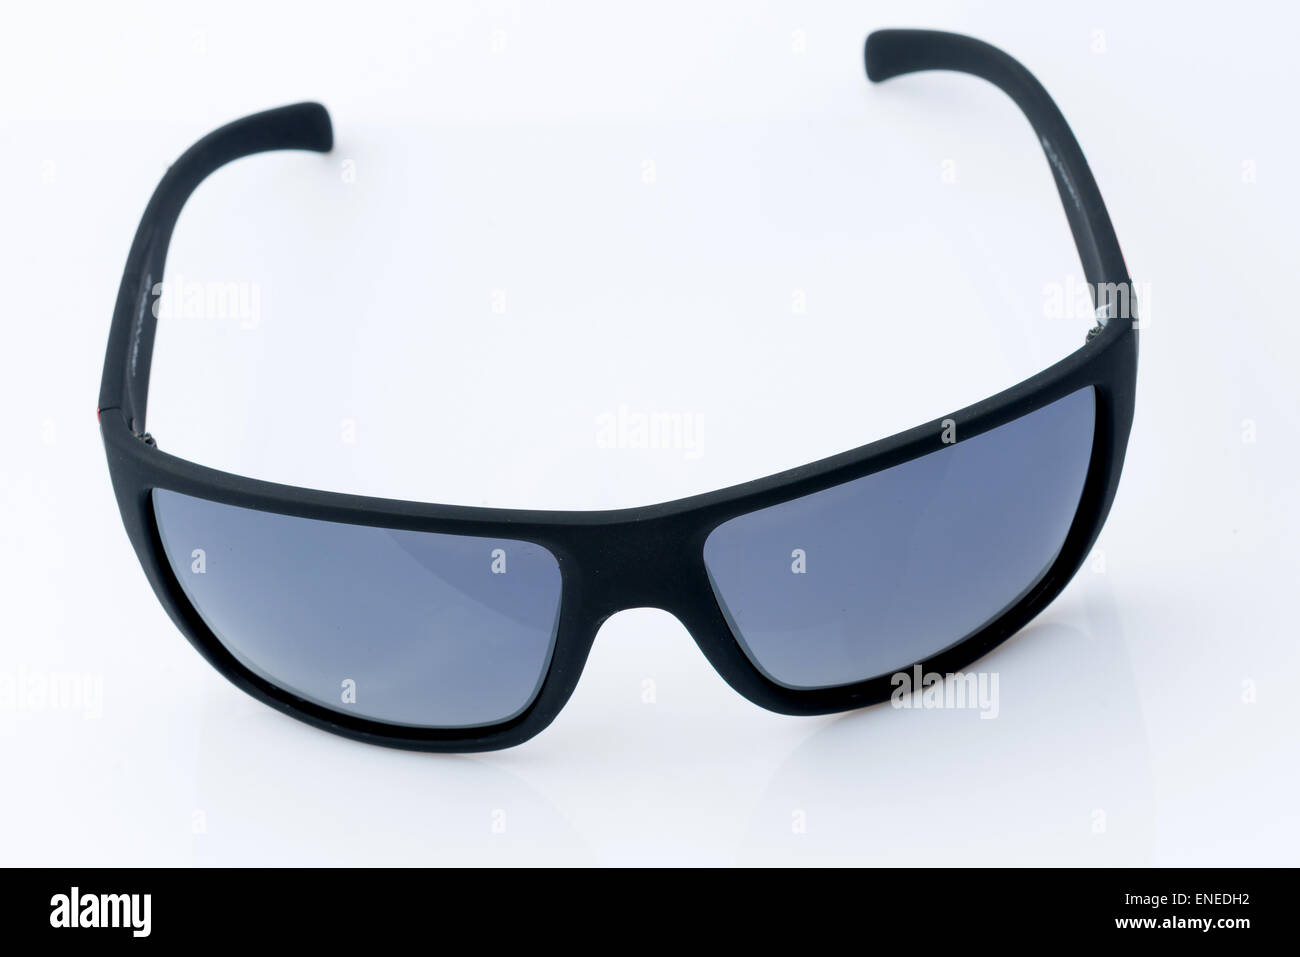 Fashion lunettes syn on white Banque D'Images